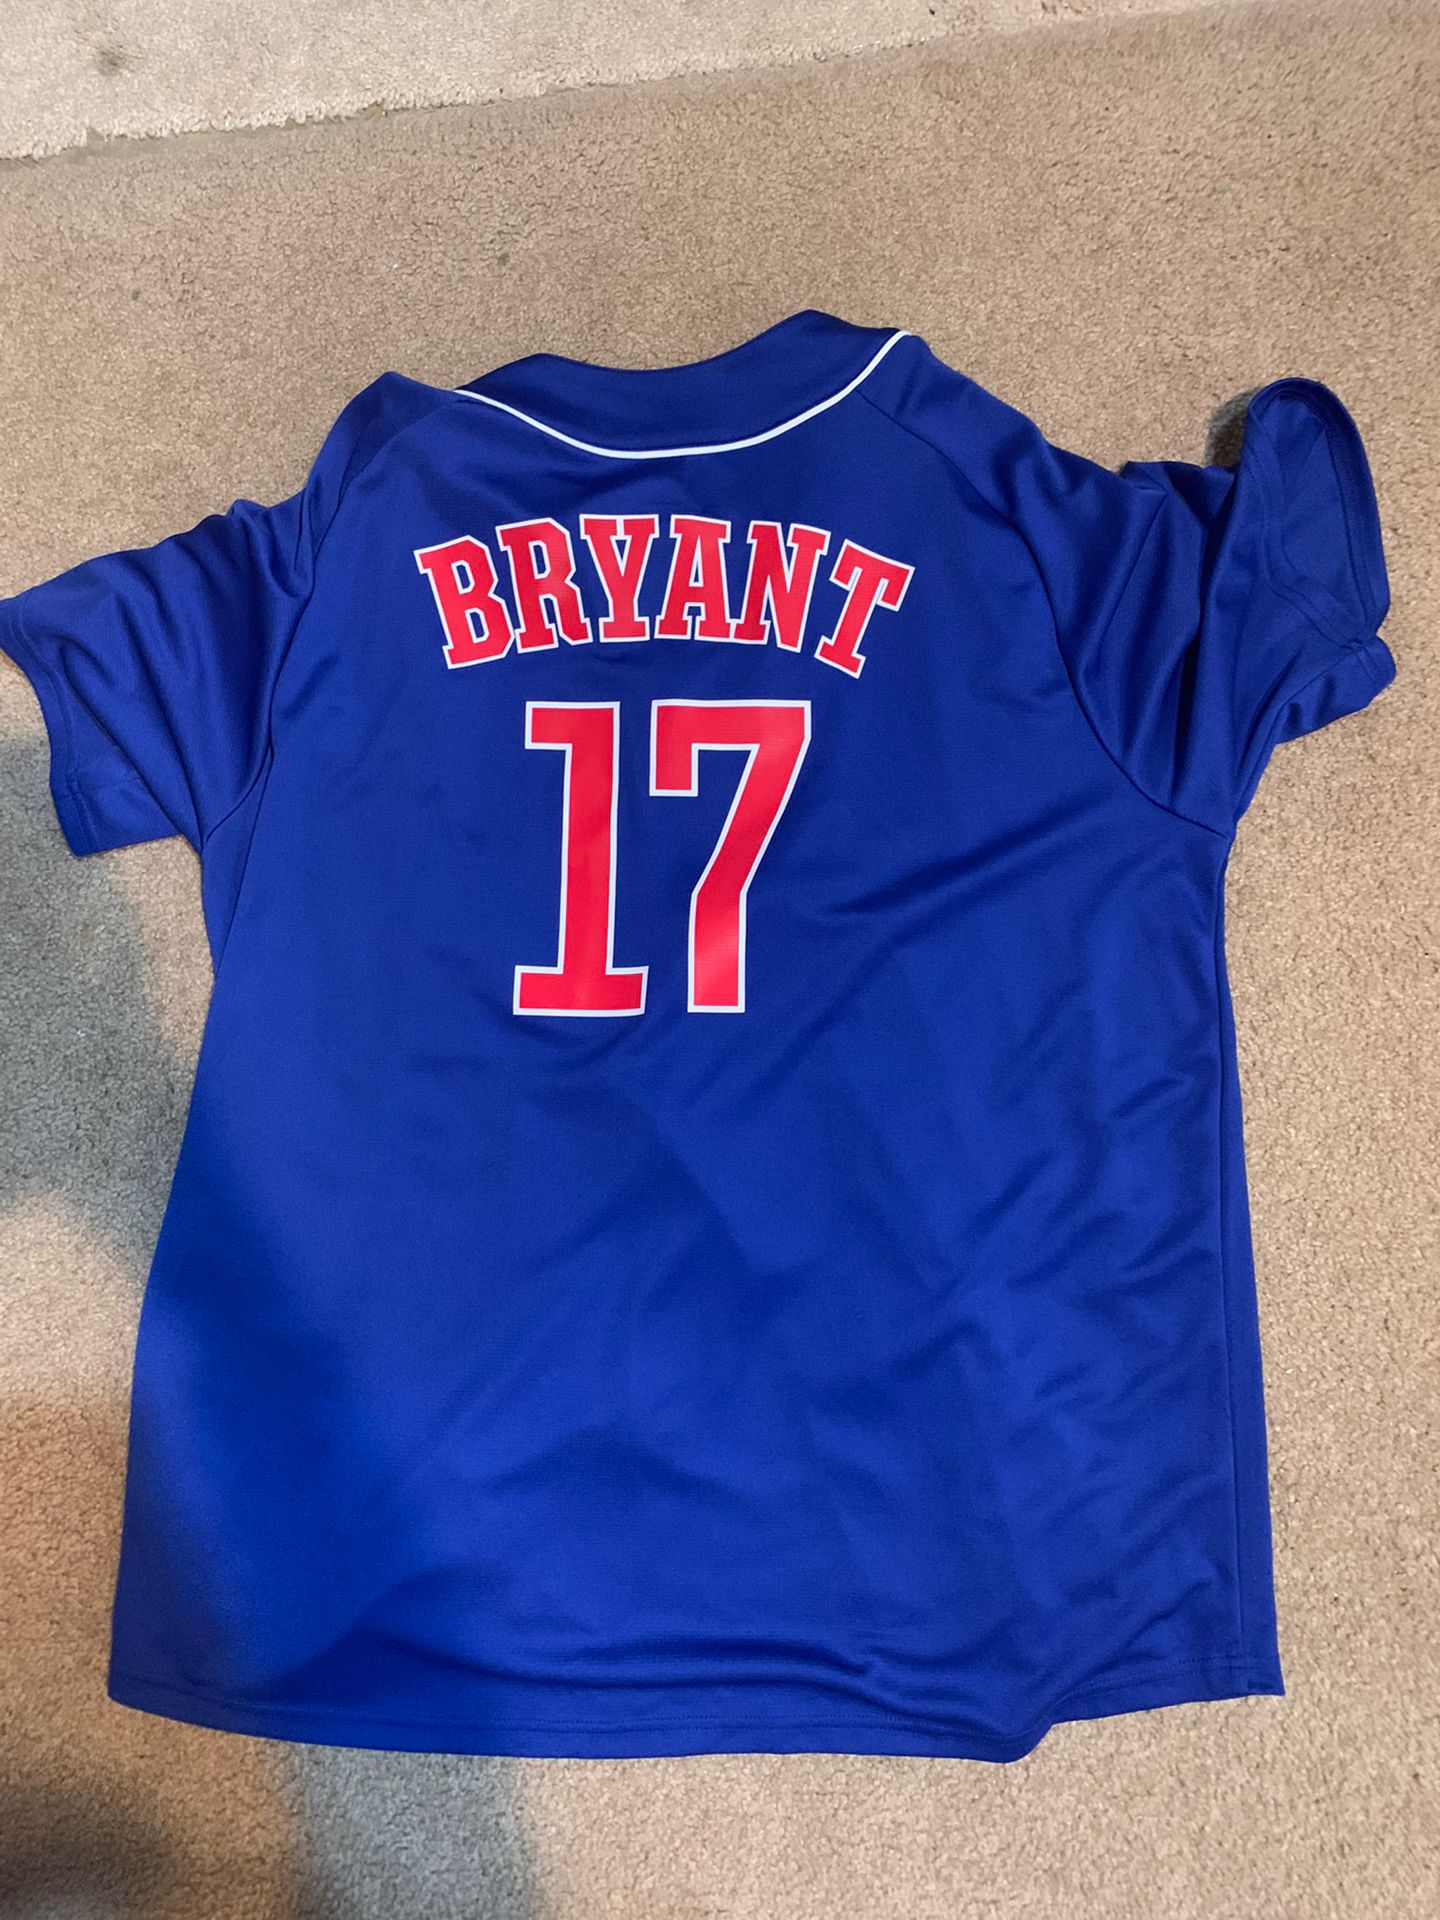 Kris Bryant - San Francisco Giants Jersey XL for Sale in Naperville, IL -  OfferUp